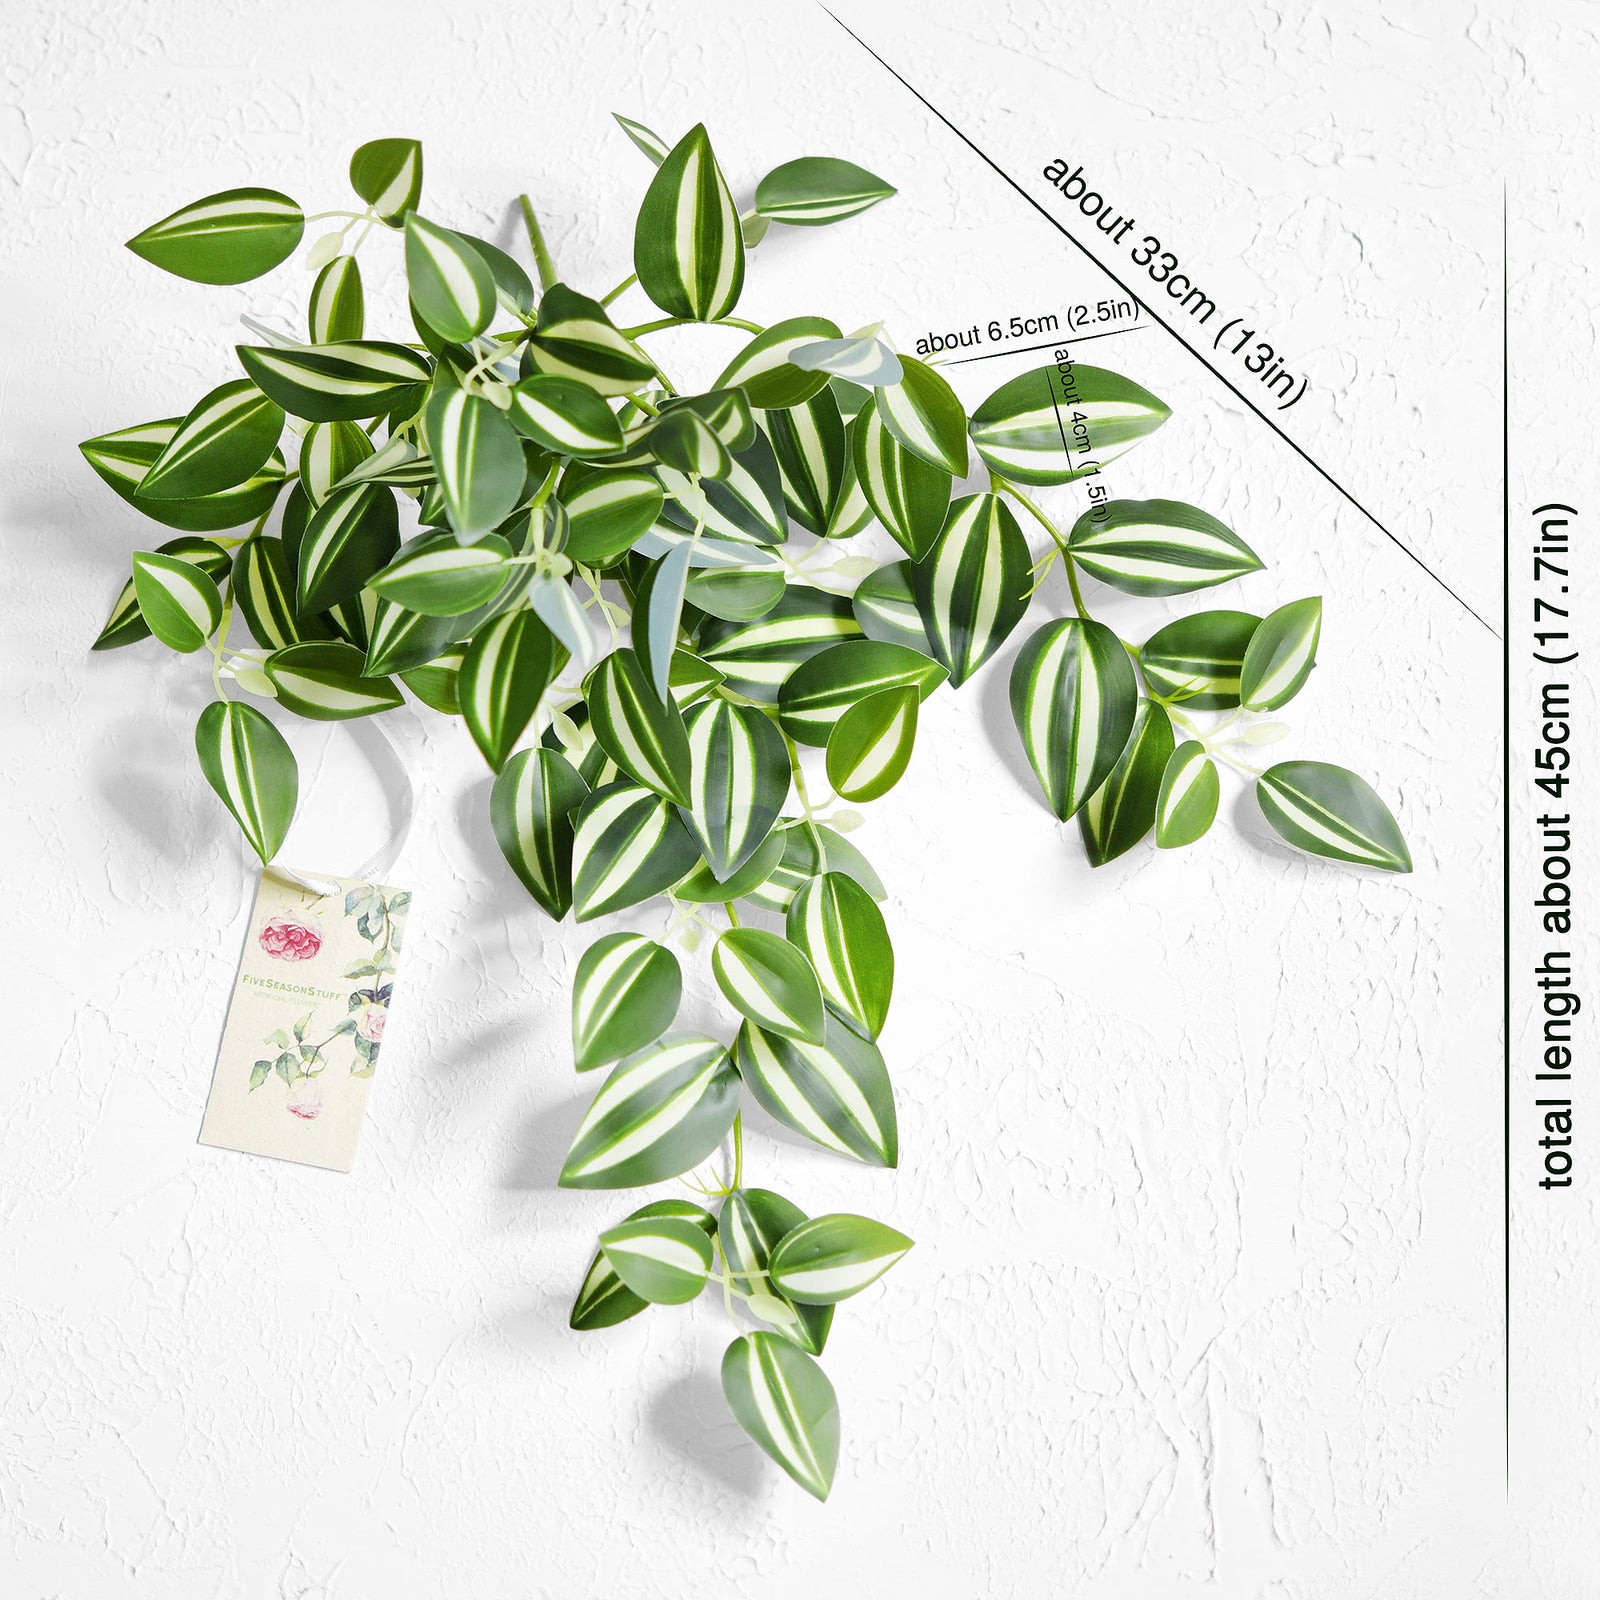 FiveSeasonStuff Real Touch Artificial Hanging Foliage Plant Tradescantia Wandering Jew House Plant 2 Stems